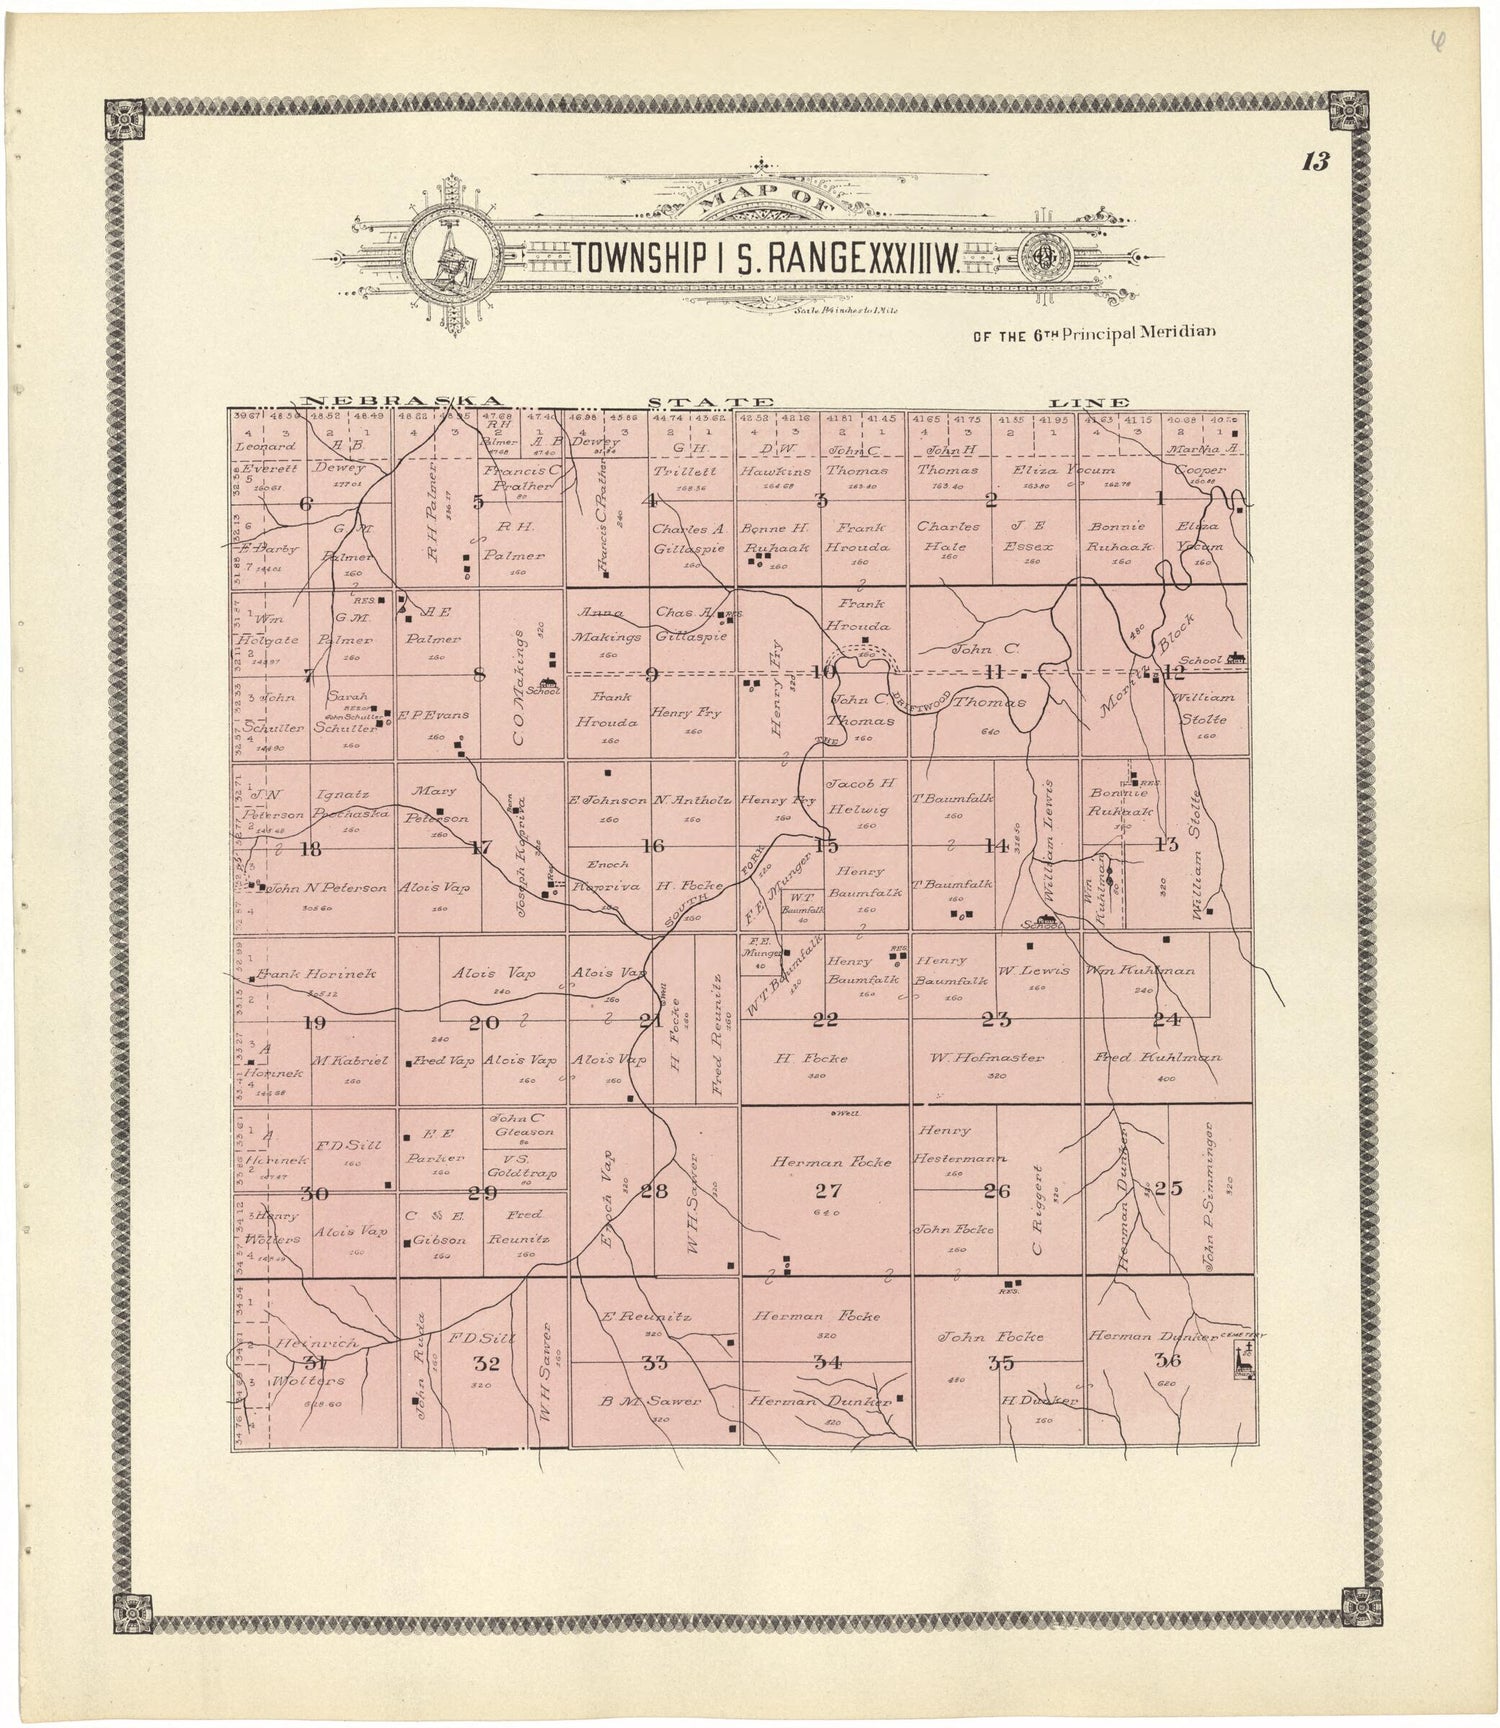 This old map of Map of Township 1 S. Range XXXIII W. from Standard Atlas of Rawlins County, Kansas from 1906 was created by  Geo. A. Ogle &amp; Co in 1906